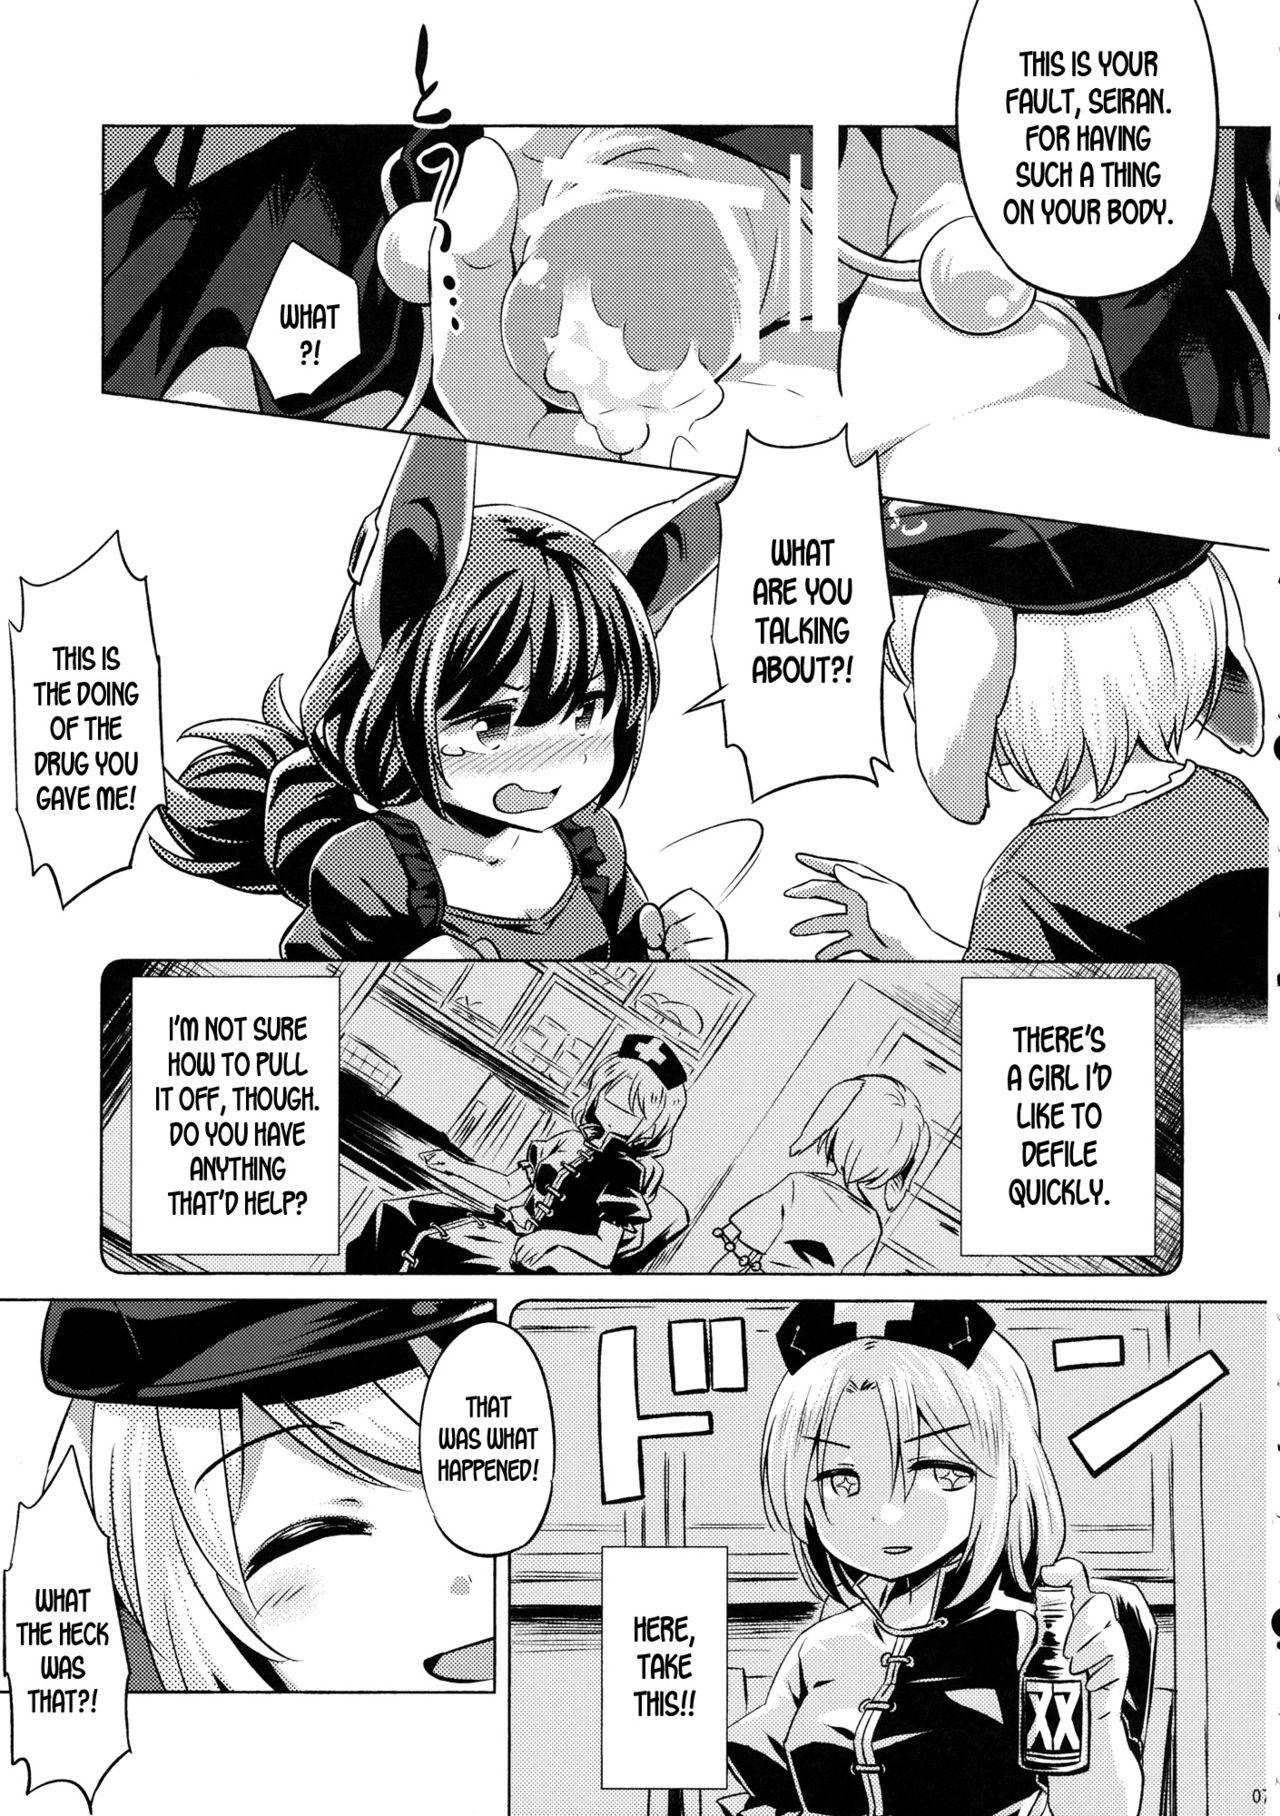 Rola Speed Strike Seiran - Touhou project Fat Ass - Page 6